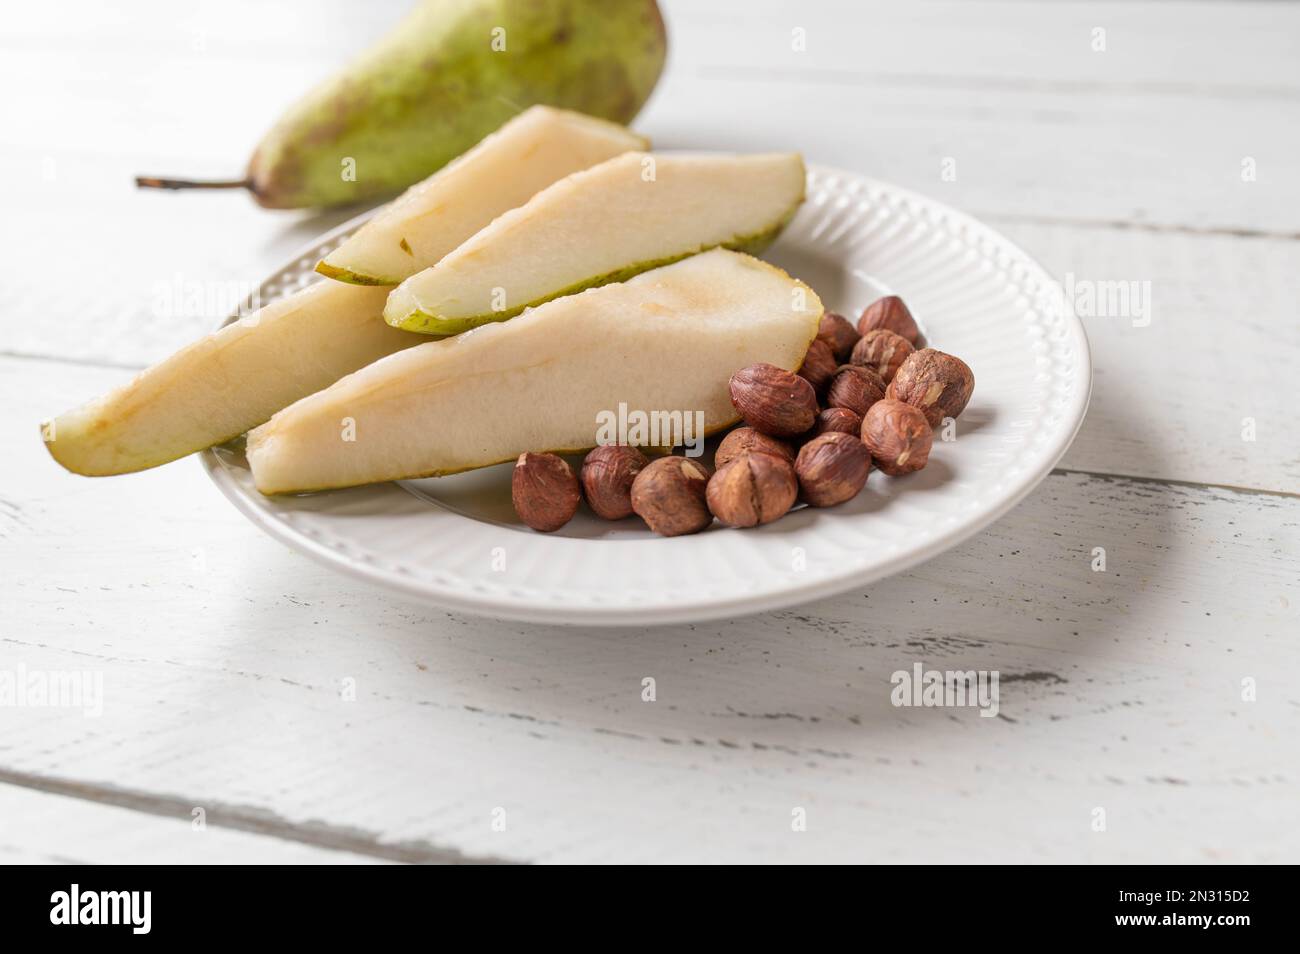 Healthy afternoon snack with fresh pears and hazelnuts Stock Photo